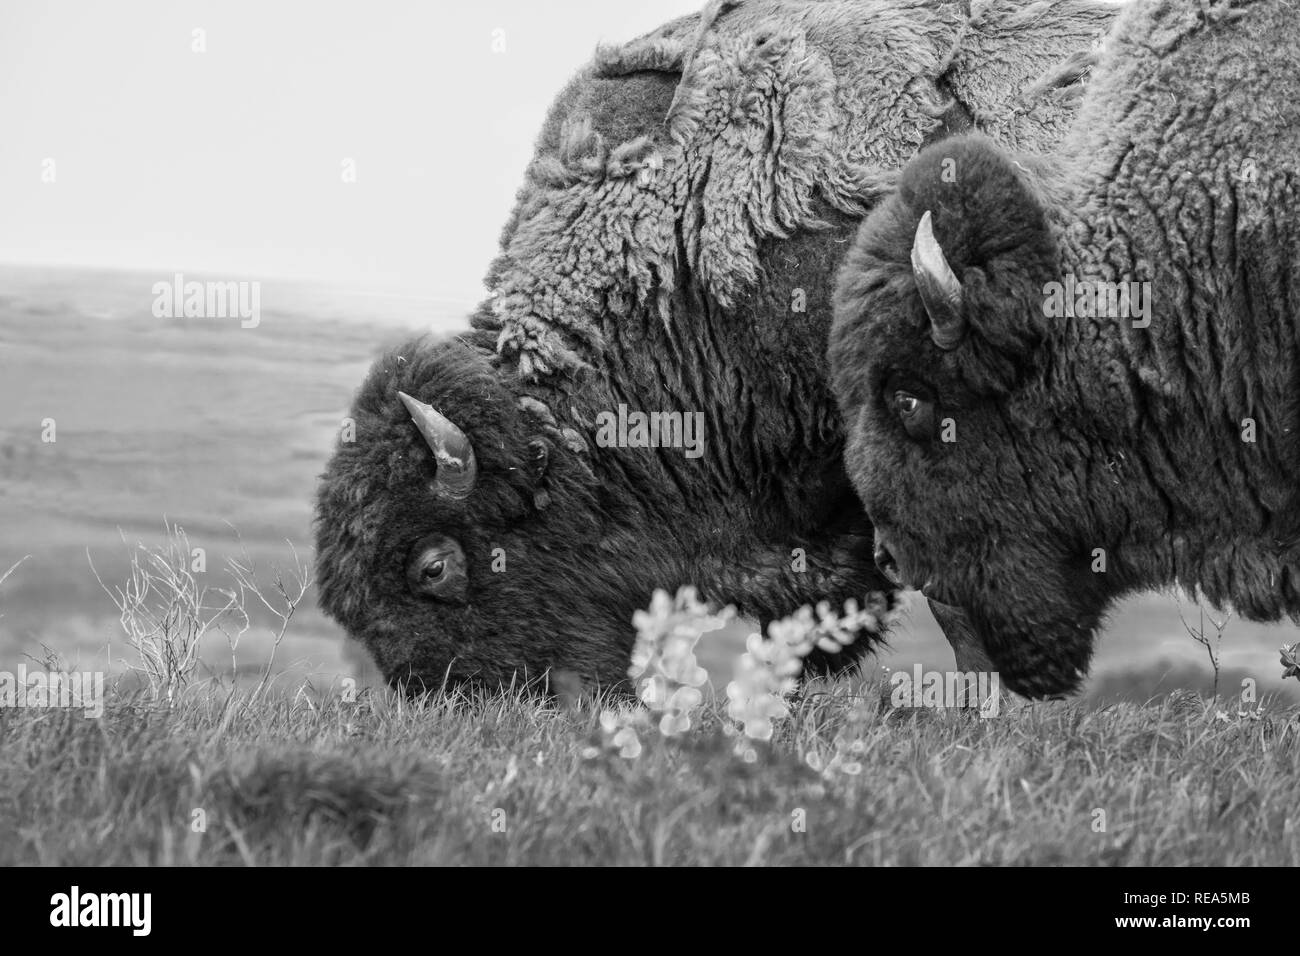 American bison (incorrectly referred to as a 'buffalo') at the Maxwell Wildlife Refuge in Kansas. Once numbered in the millions across the Great Plains of North American, they were driven to near extinction by hunting and land deveopment. Stock Photo